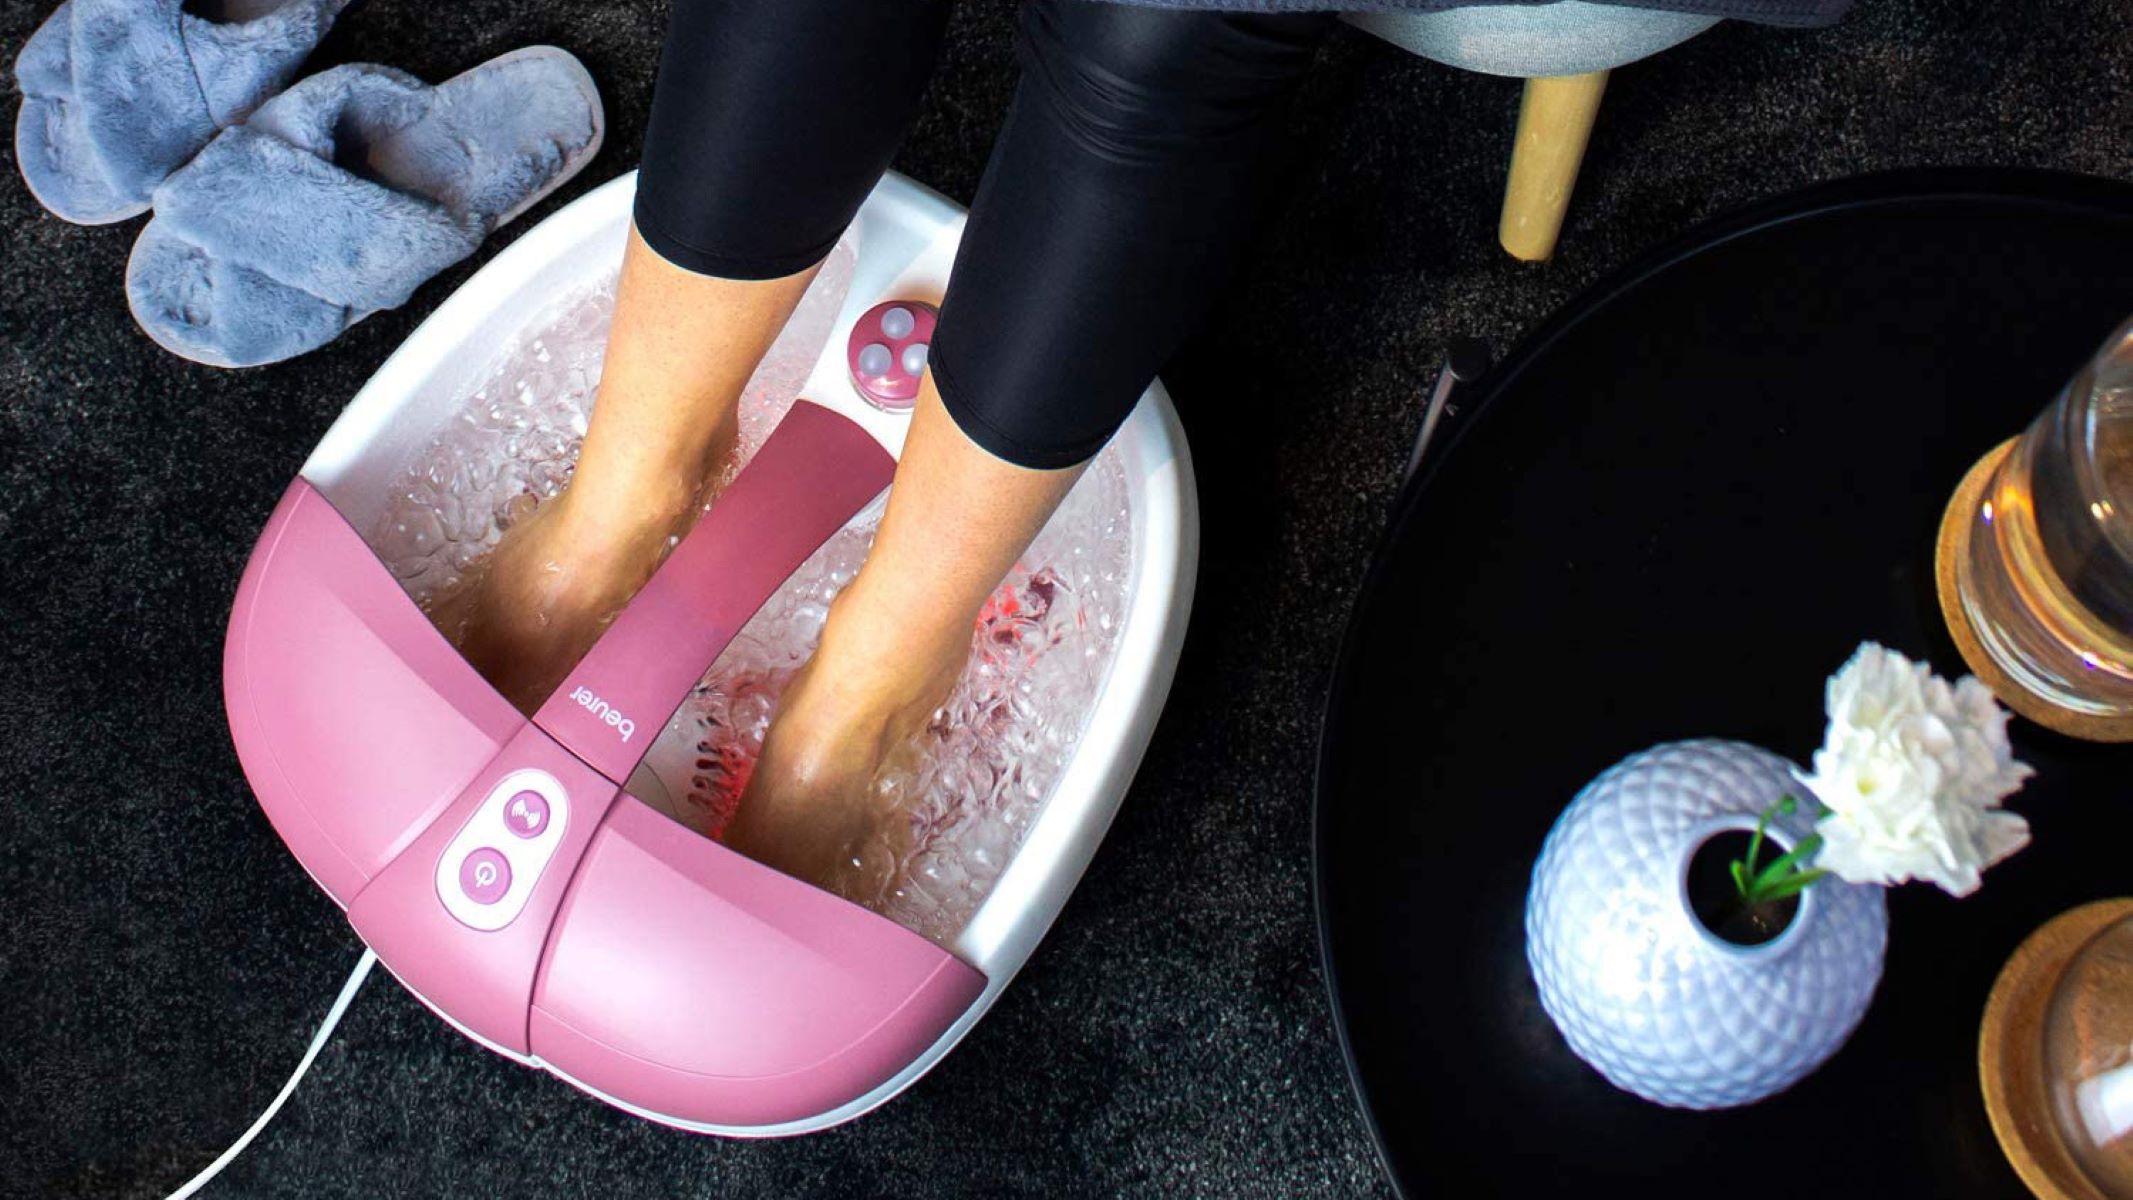 Which Type Of Foot Spa Does Not Circulate Water?